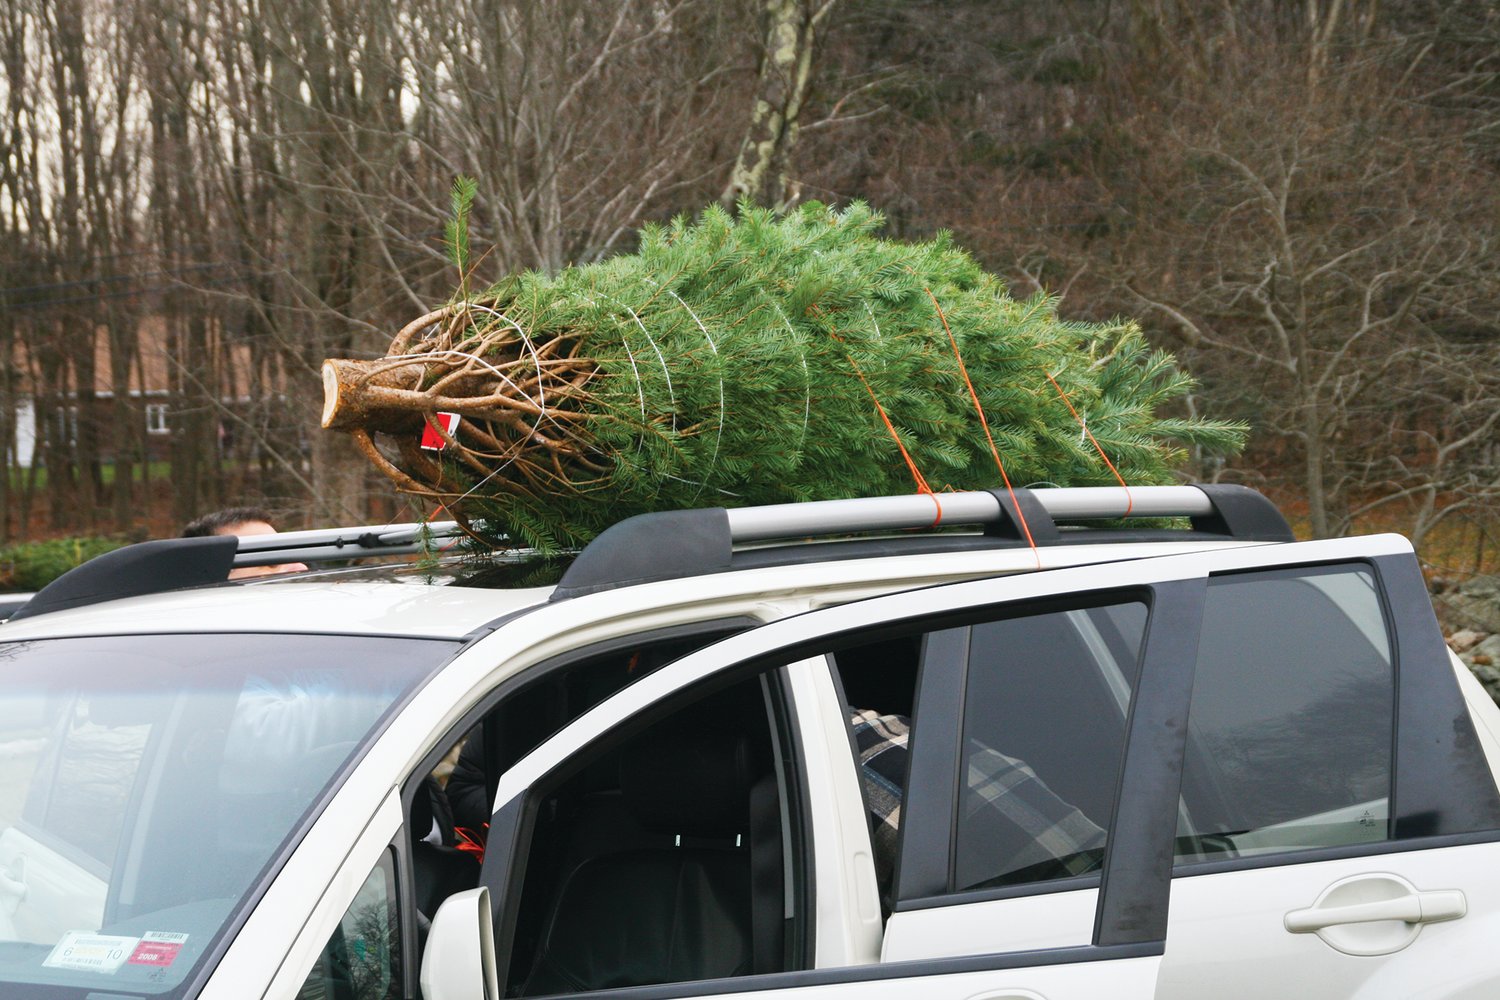 Losing a Christmas tree on the drive home would no doubt put a damper on the holiday season — but more importantly a tree that comes loose from a vehicle could also cause a crash. Previous research from AAA found that road debris caused more than 200,000 crashes during a four-year period, resulting in approximately 39,000 injuries and 500 deaths.